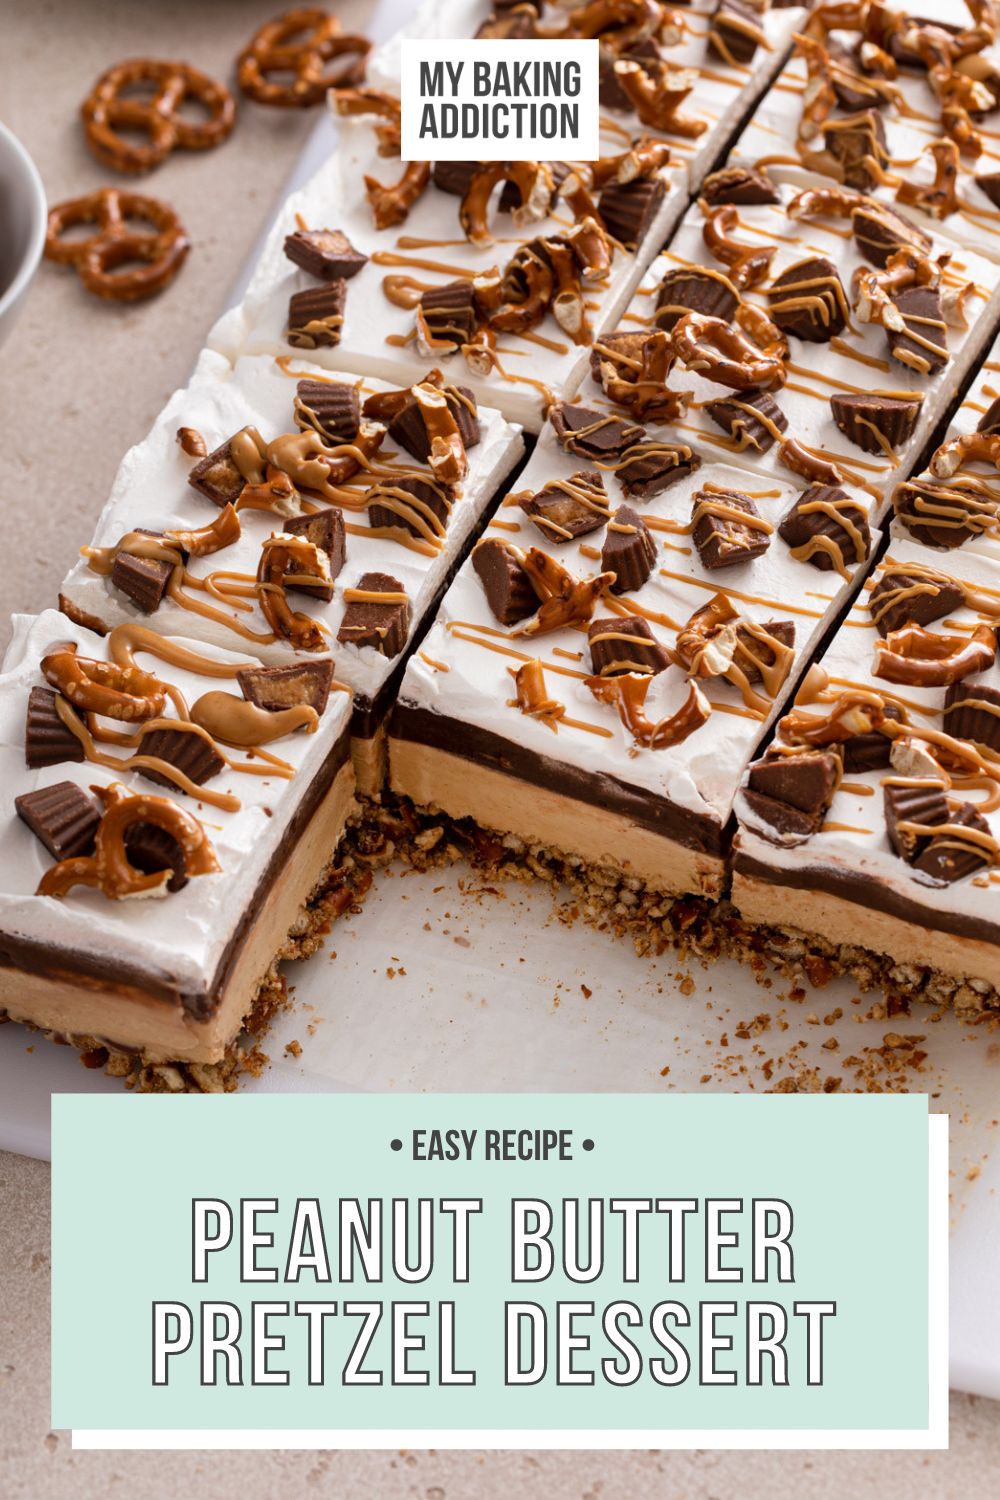 Peanut butter pretzel dessert with two slices removed. Text overlay includes recipe name.